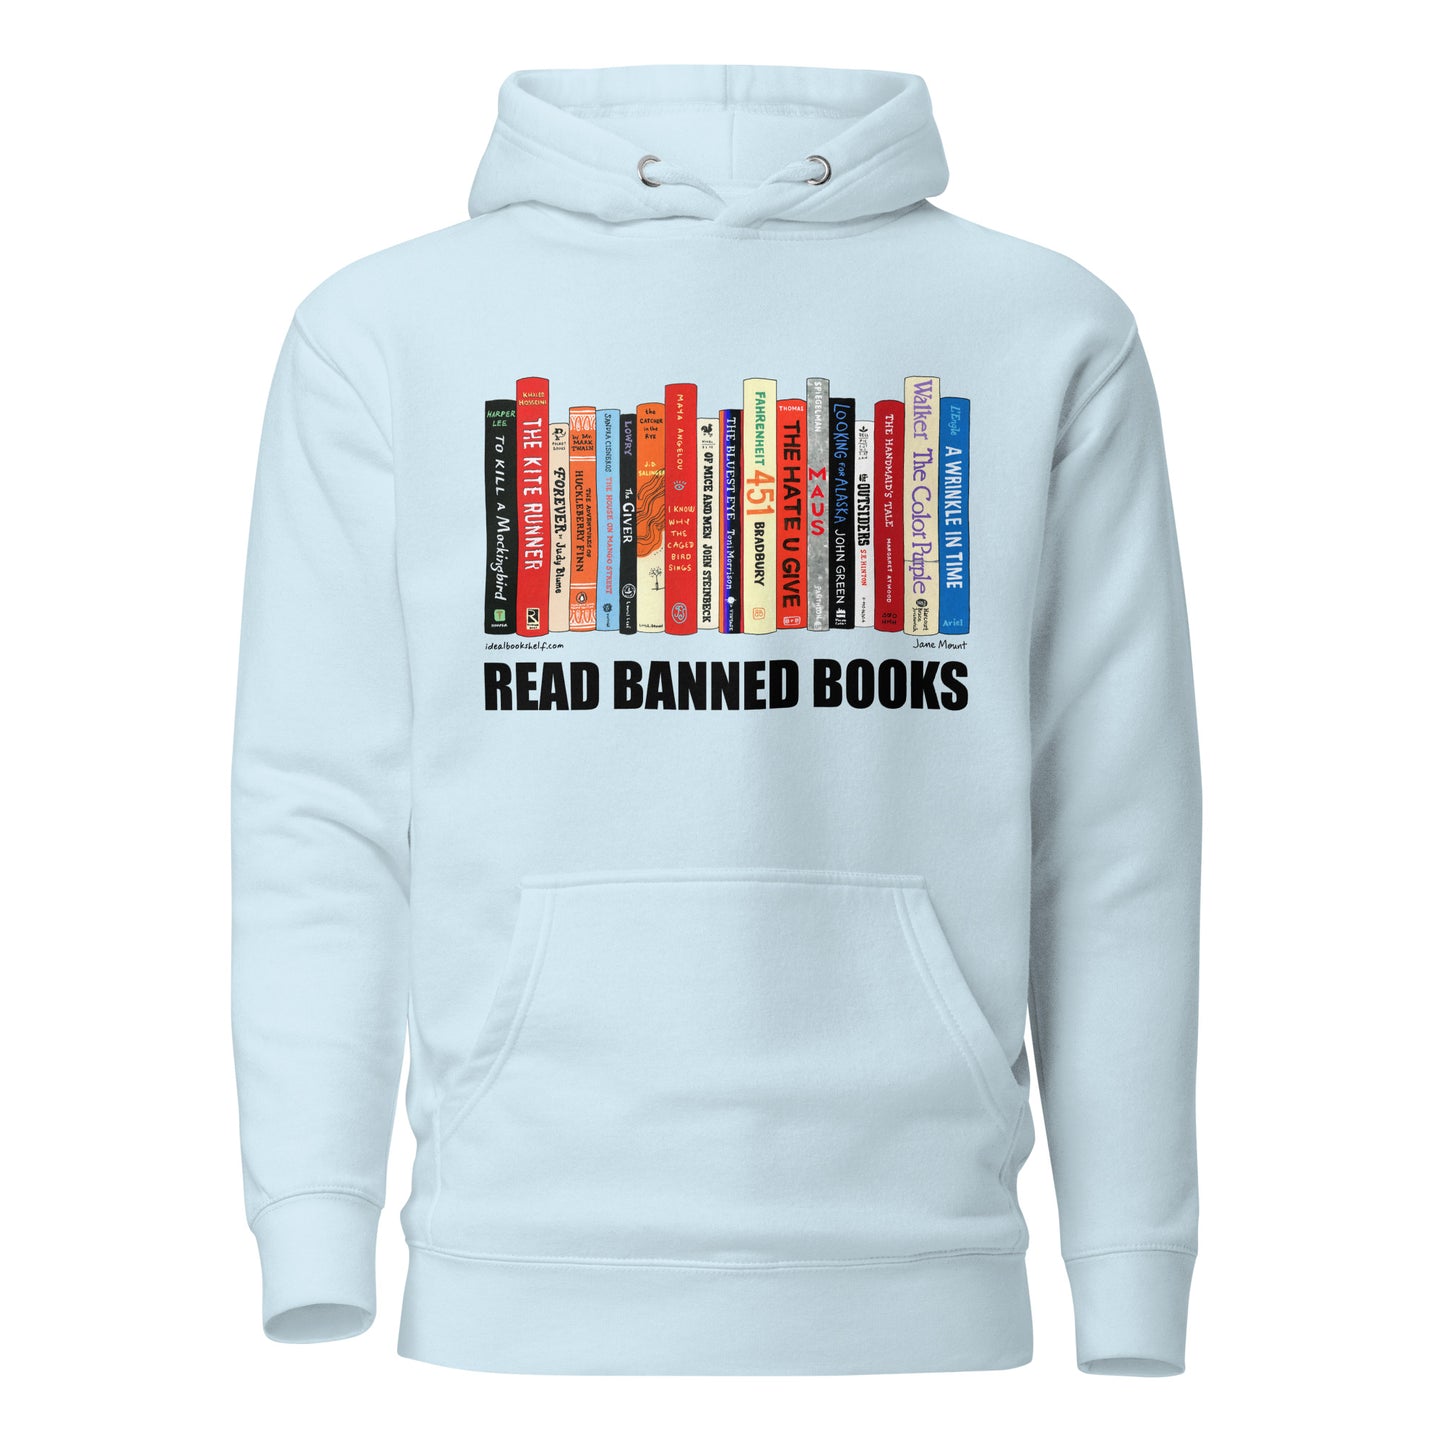 READ BANNED BOOKS Unisex Hoodie